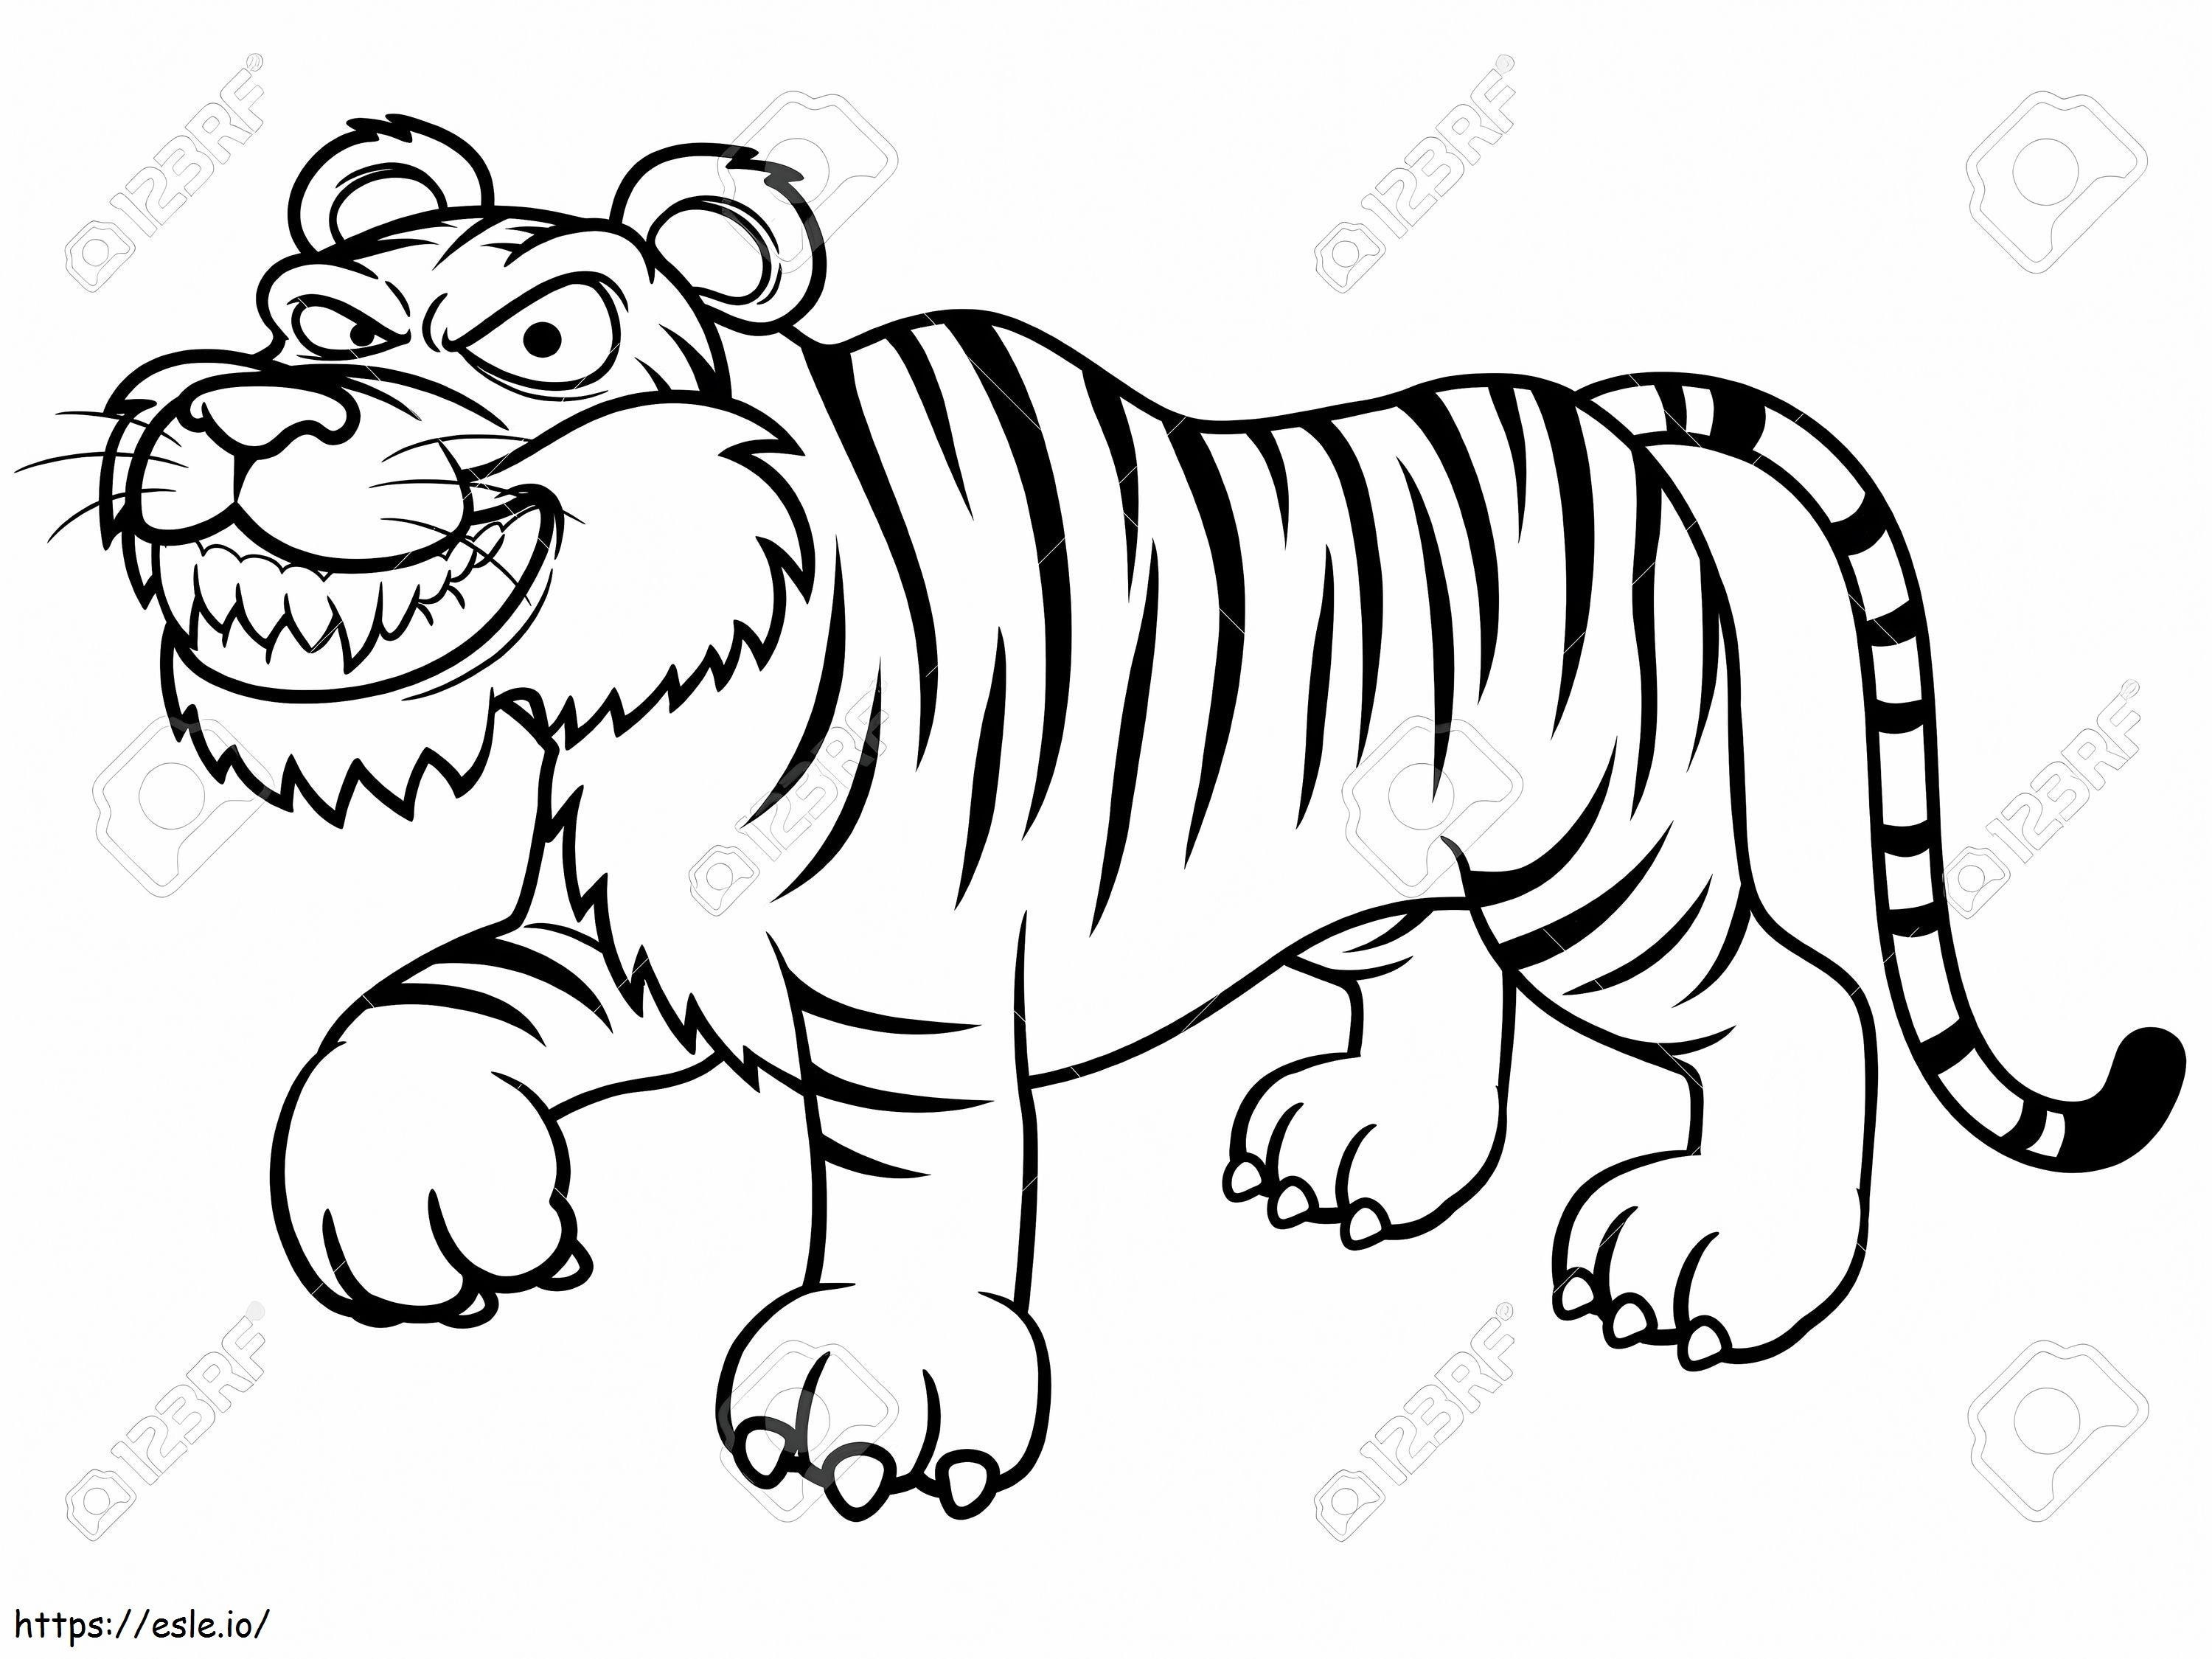 1539866536 White Tiger Clipart Coloring Book Pencil And In Color coloring page